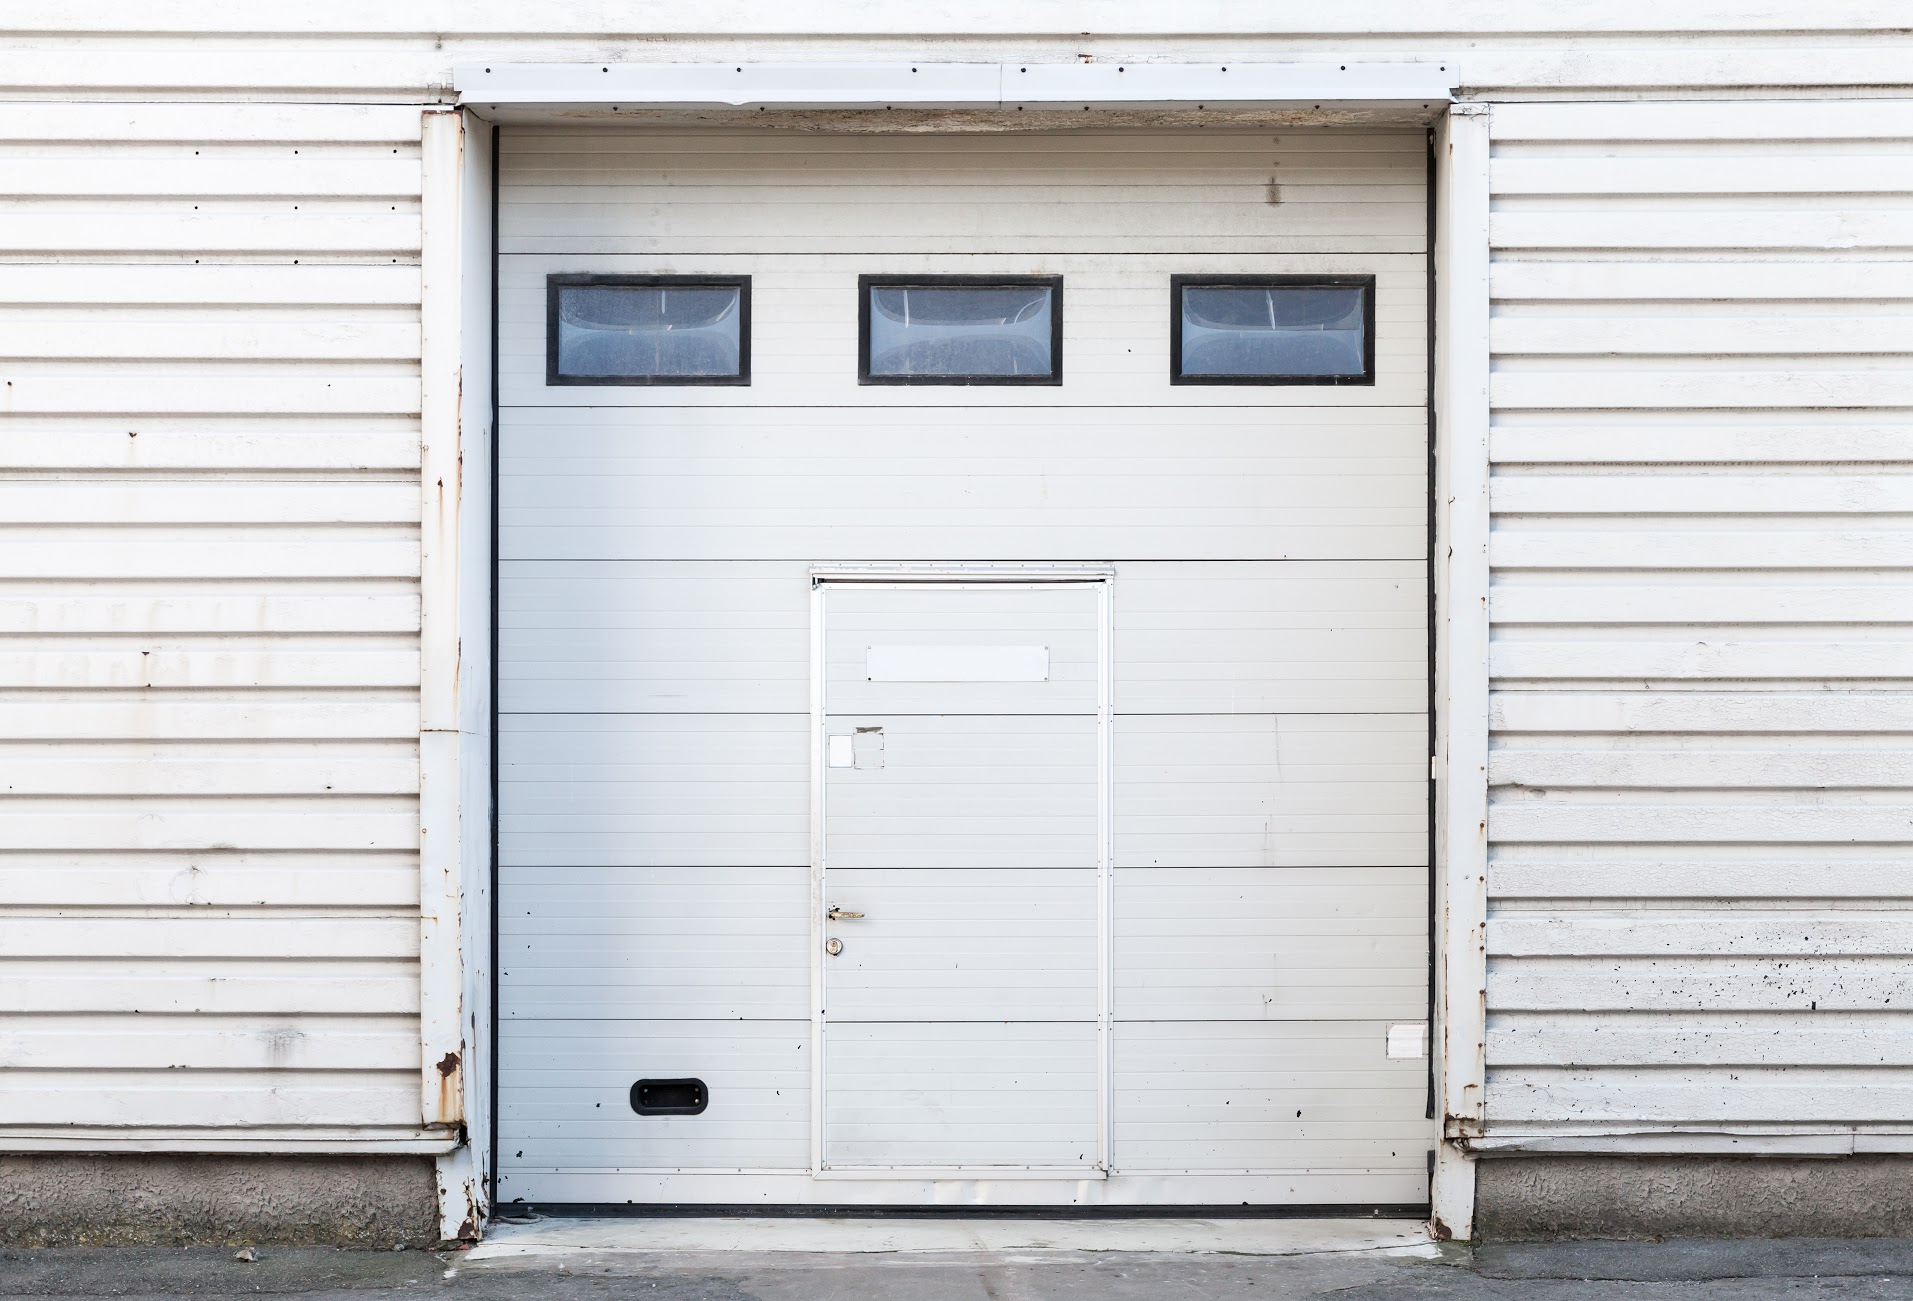 We offer fast, reliable, and affordable garage door services in Dallas, Texas and surrounding areas.